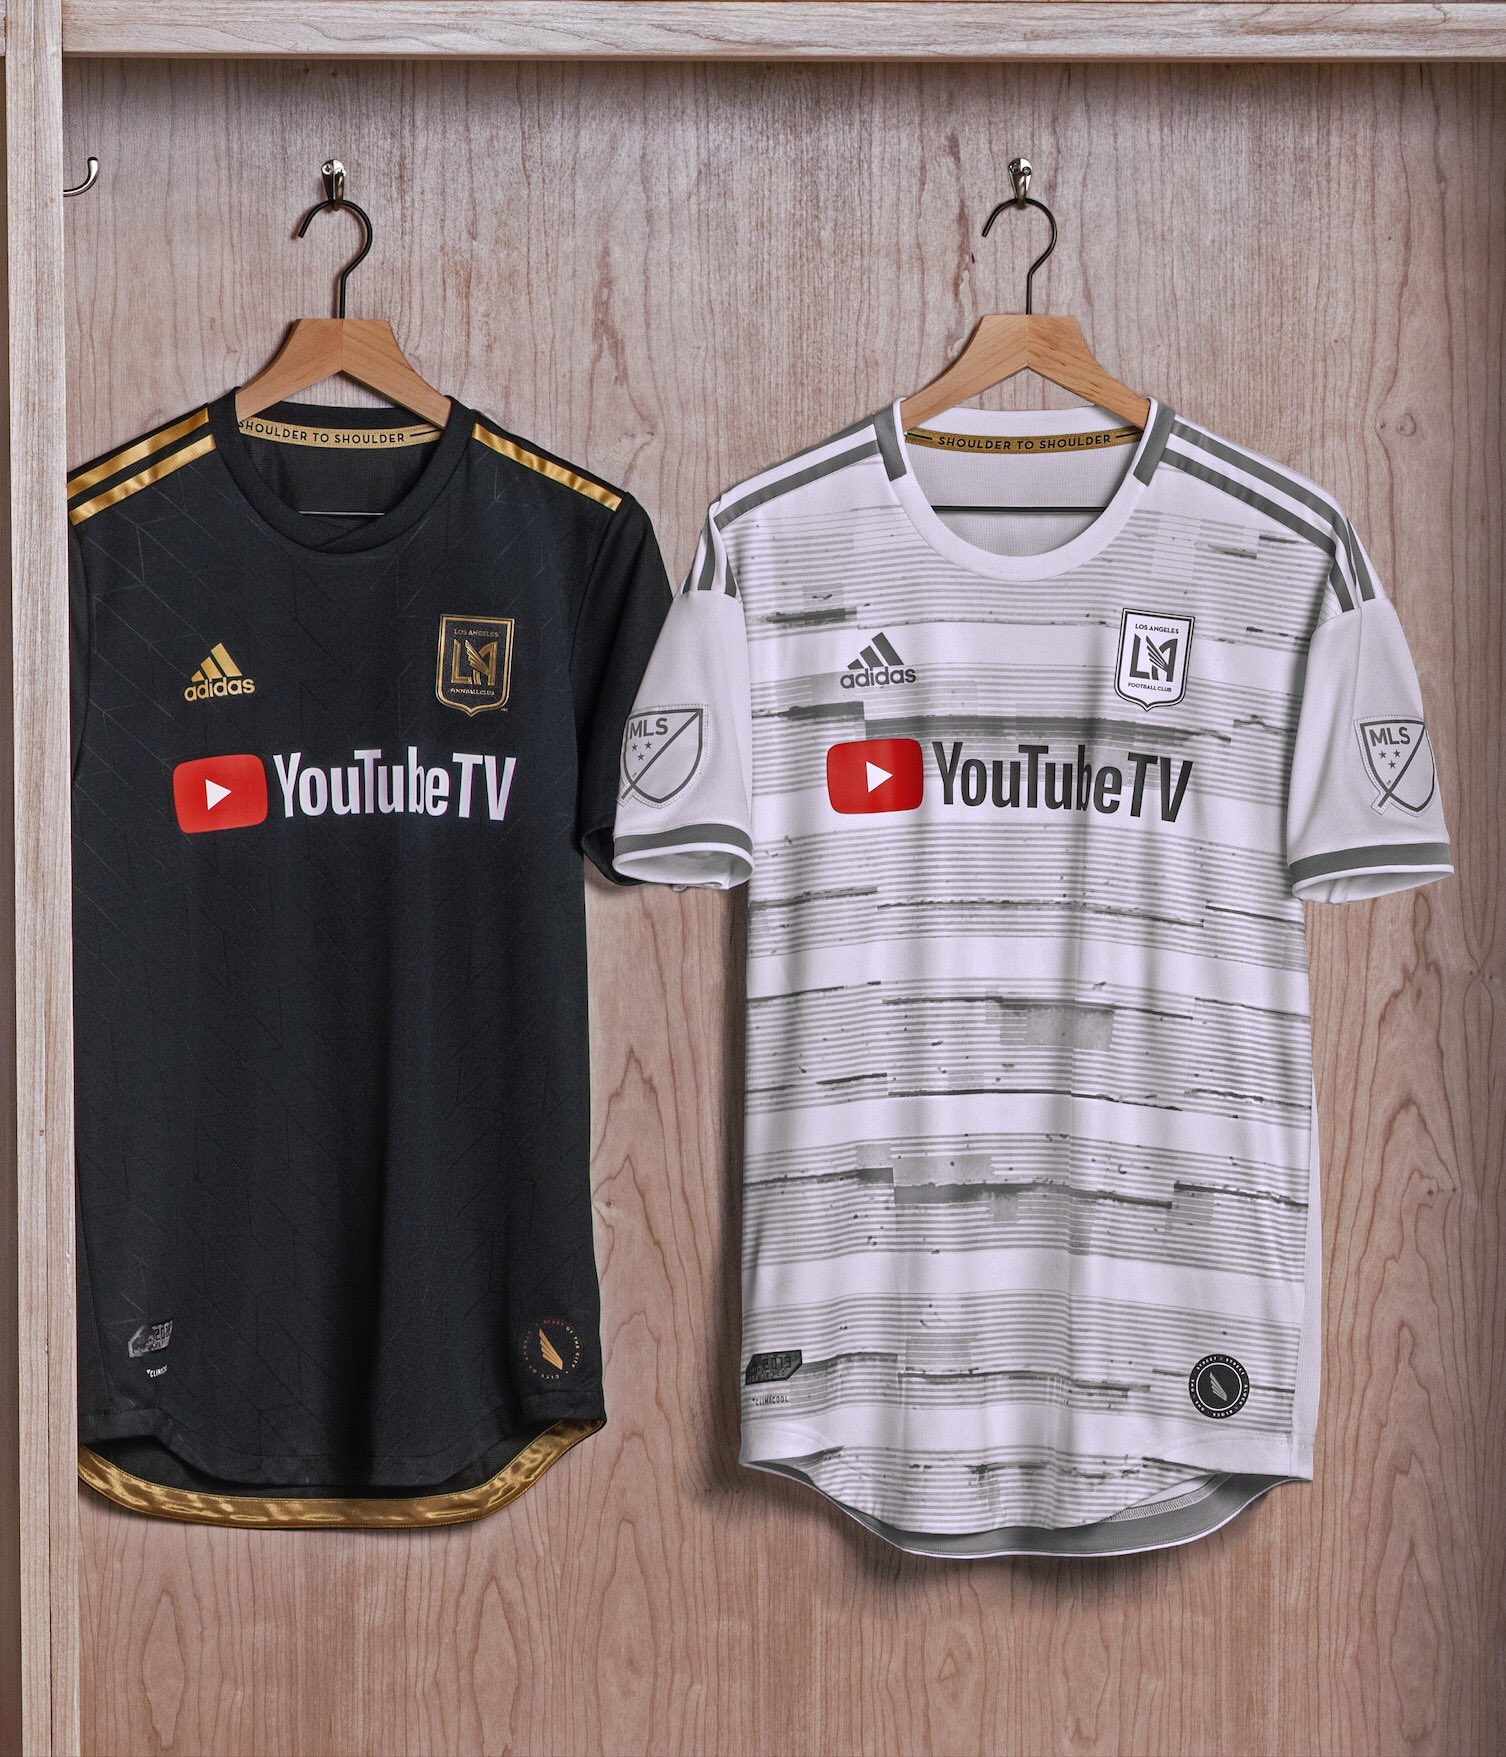 SOCCER.COM on X: Away days. Introducing the new 2019 @LAFC away